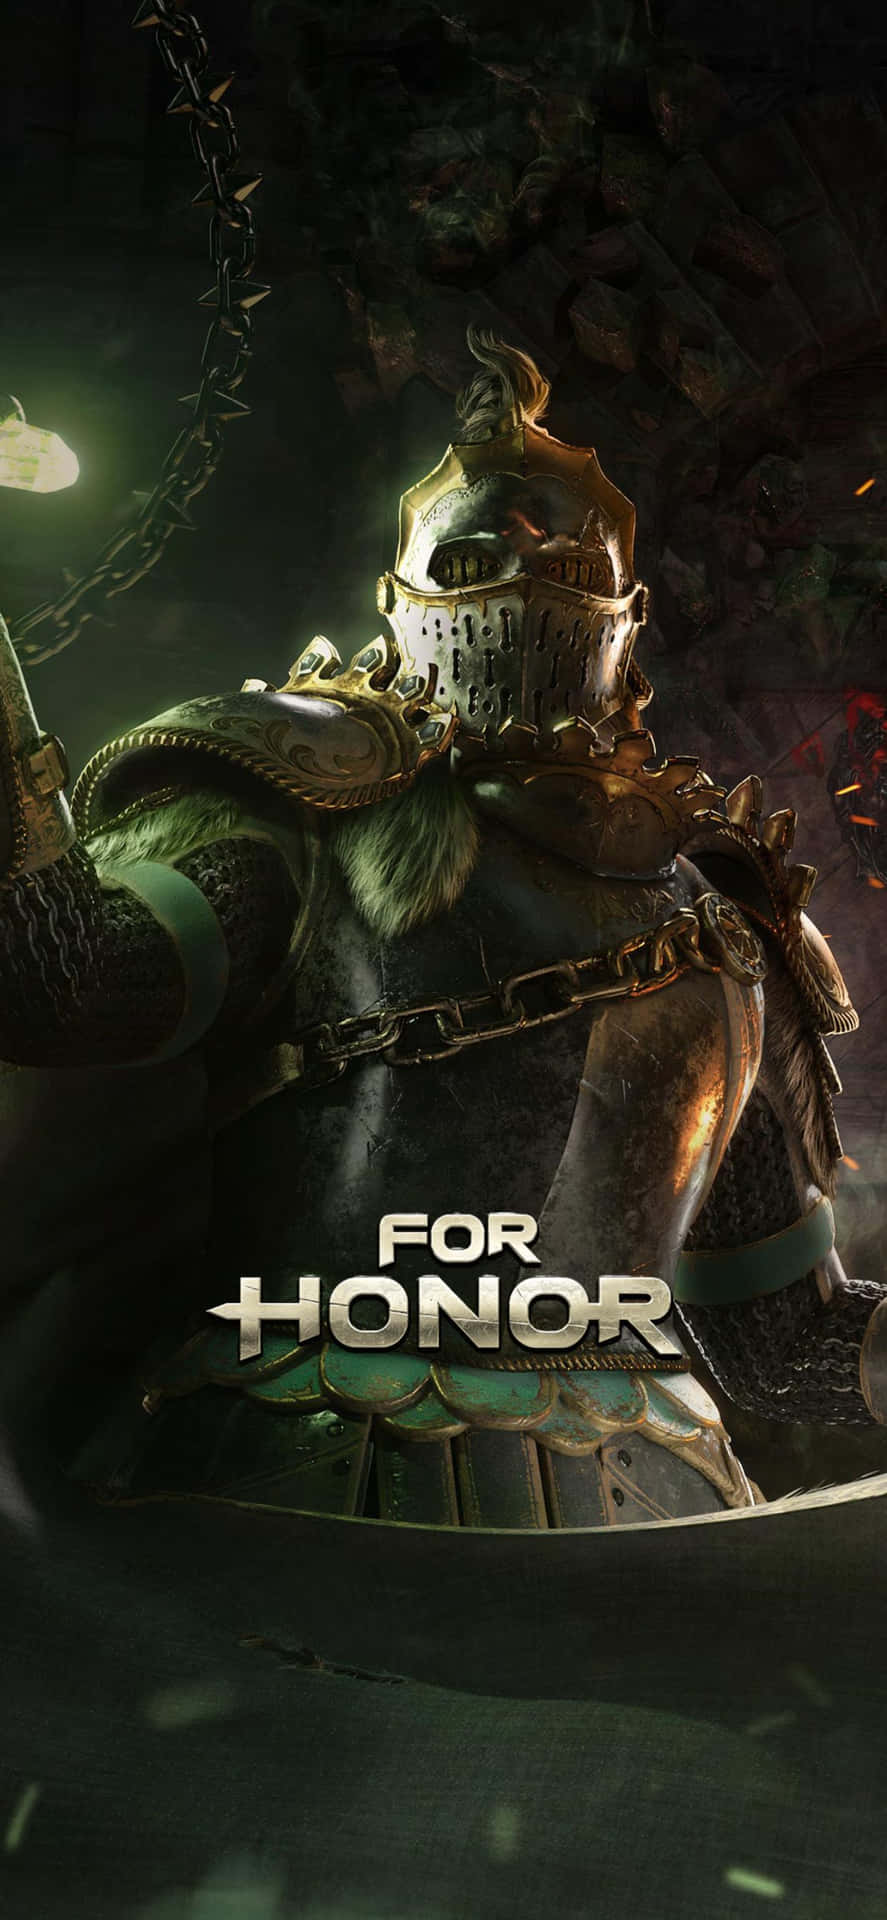 The Latest iPhone Xs Max Delivers an Epic Gaming Experience With For Honor